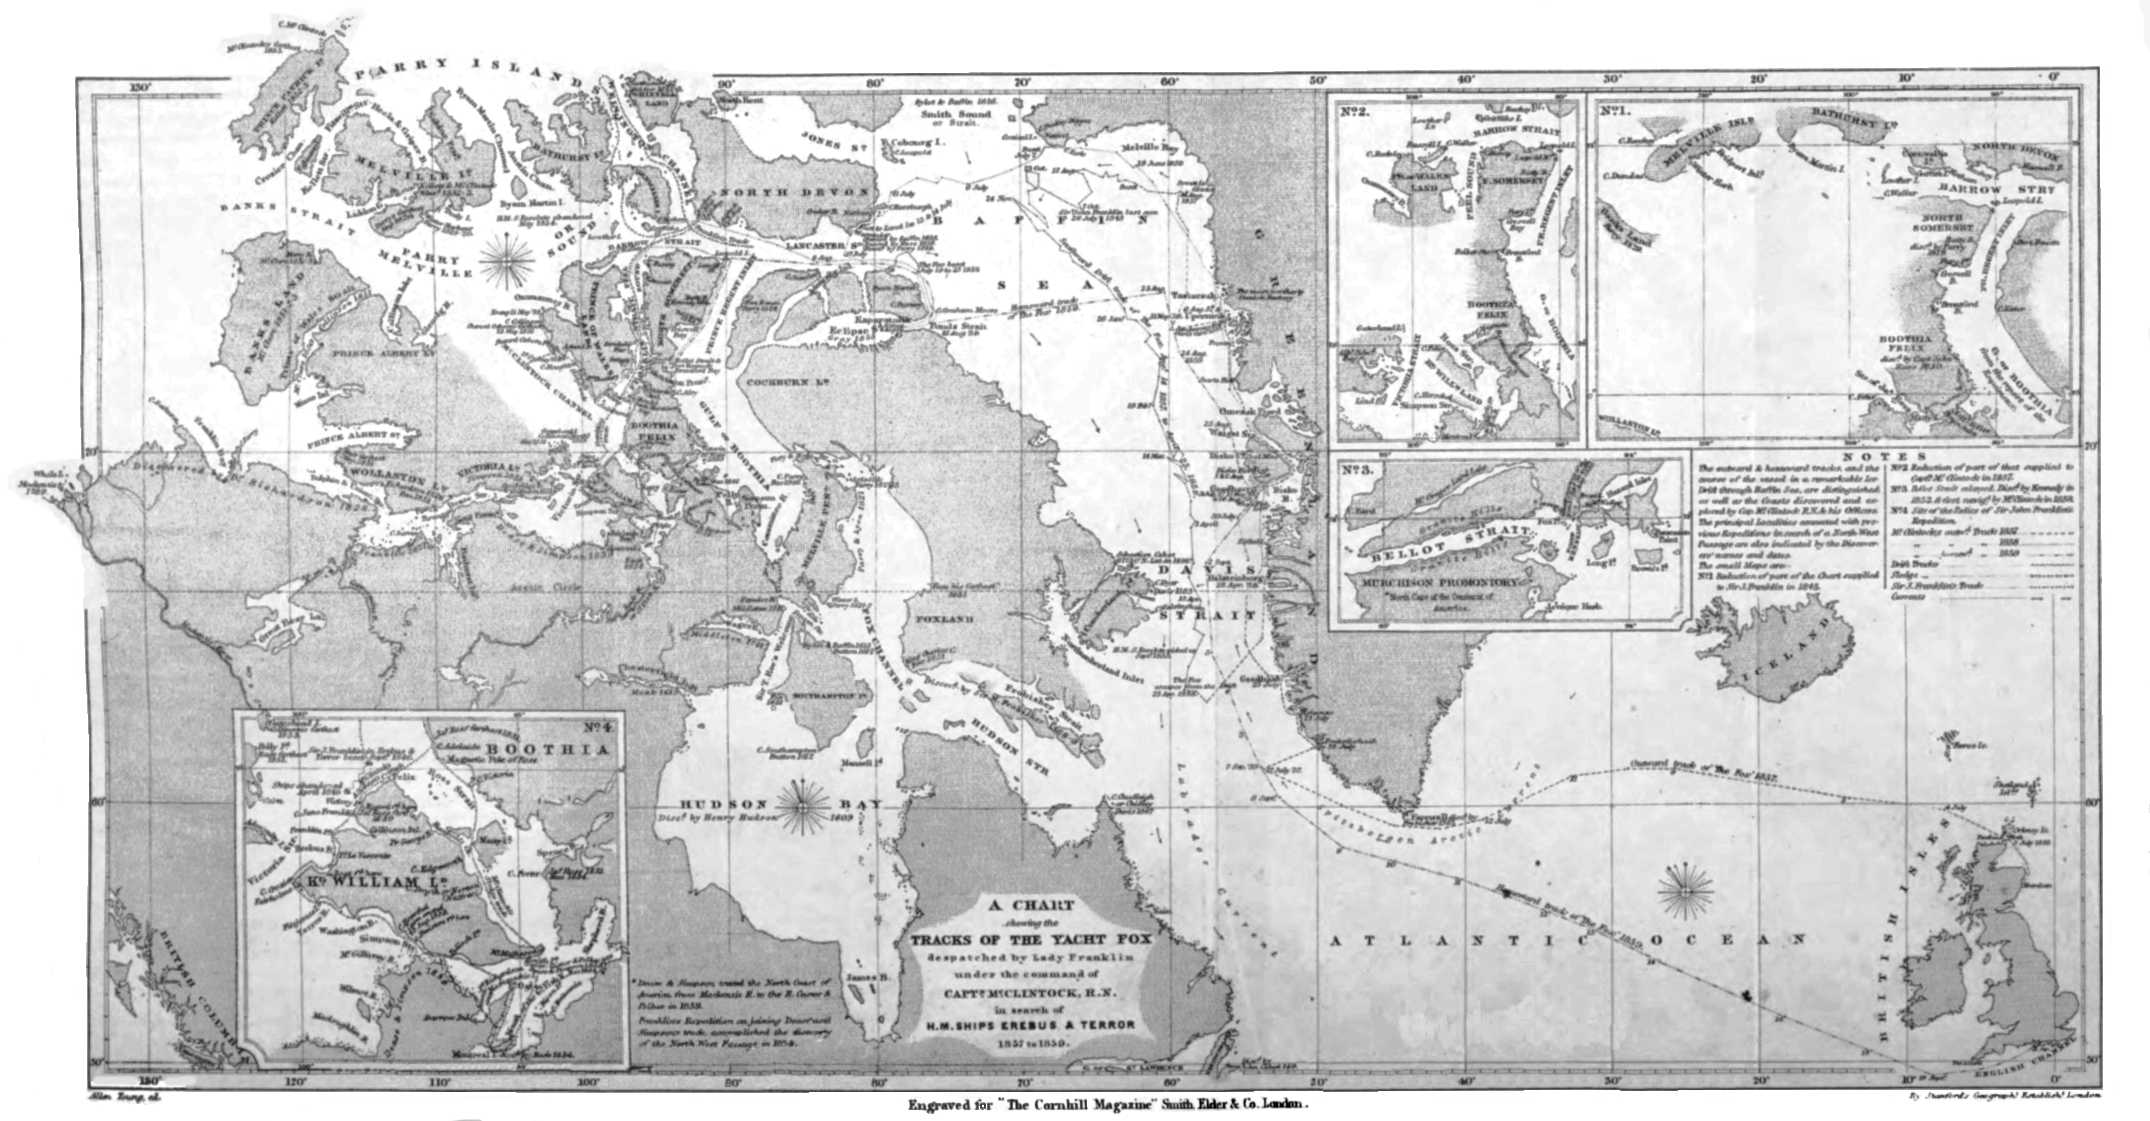 A CHART showing the TRACKS OF THE YACHT FOX despatched by Lady Franklin under the command of CAPT’N. M‘CLINTOCK, R.N. in search of H.M. SHIPS EREBUS & TERROR 1857 to 1859